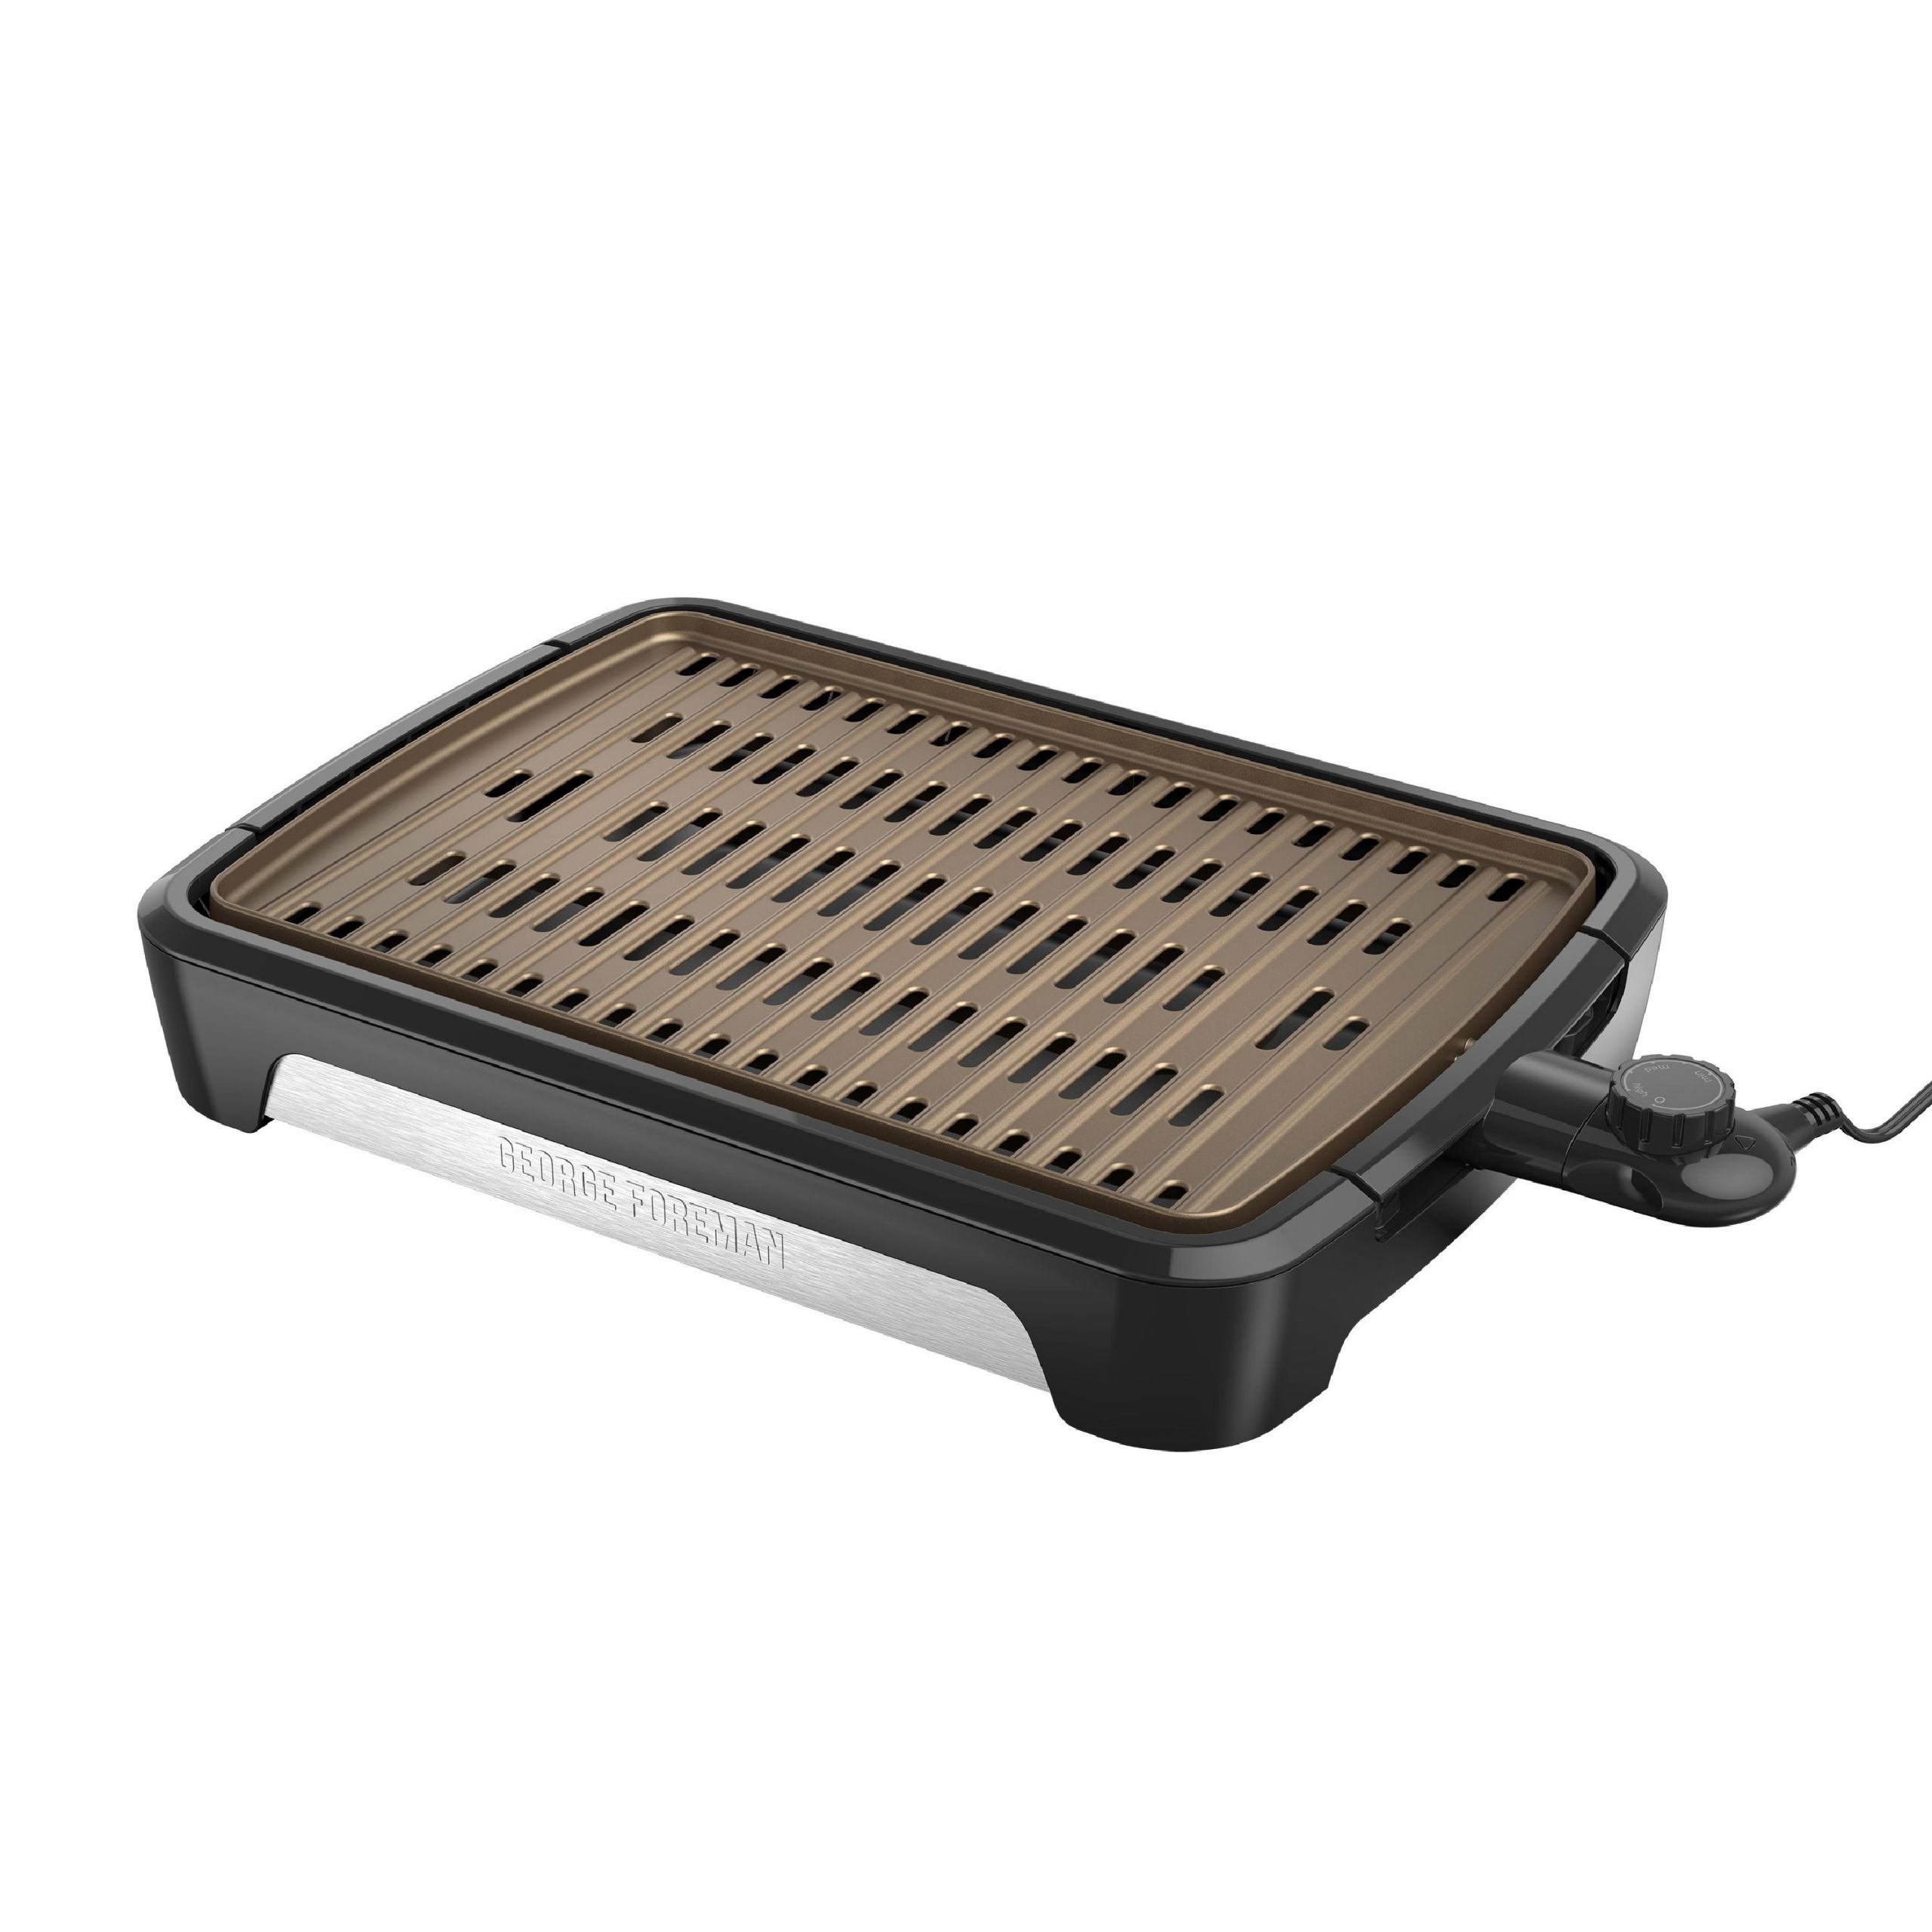 George Foreman Grill Hot Dogs
 Home